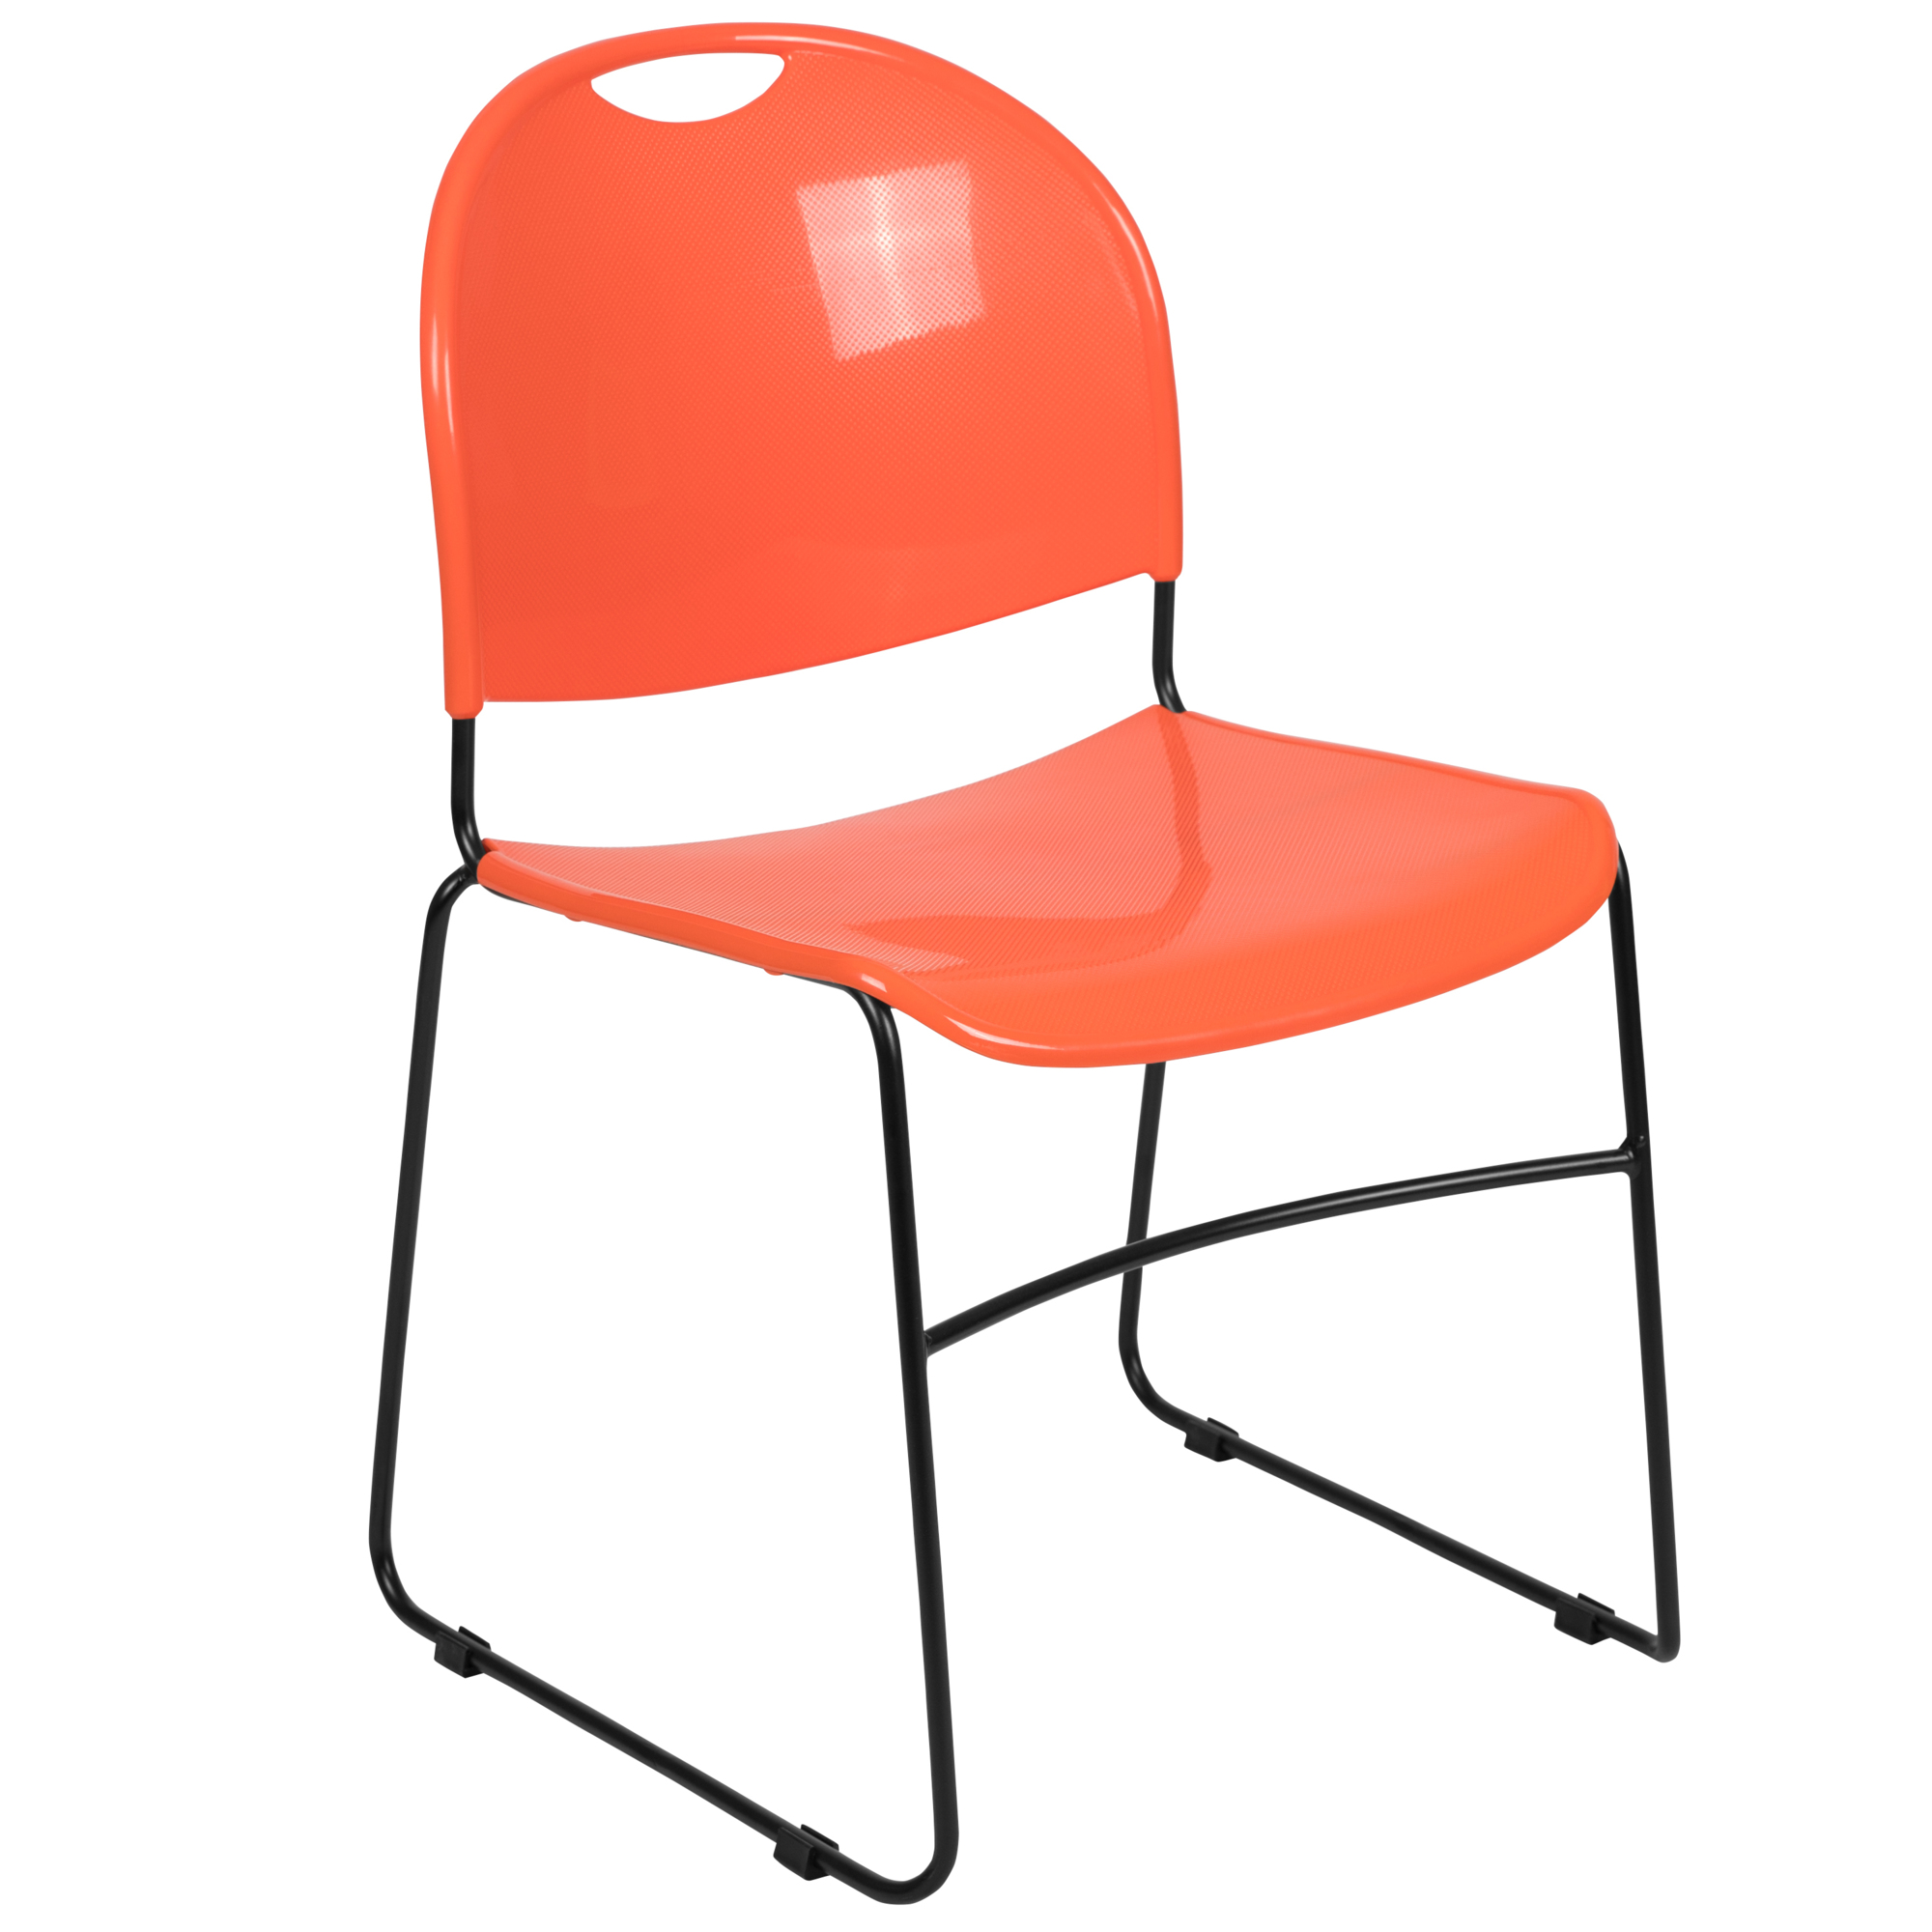 Flash Furniture, Orange Compact School Stack Chair - Guest Chair, Primary Color Orange, Included (qty.) 1, Model RUT188OR